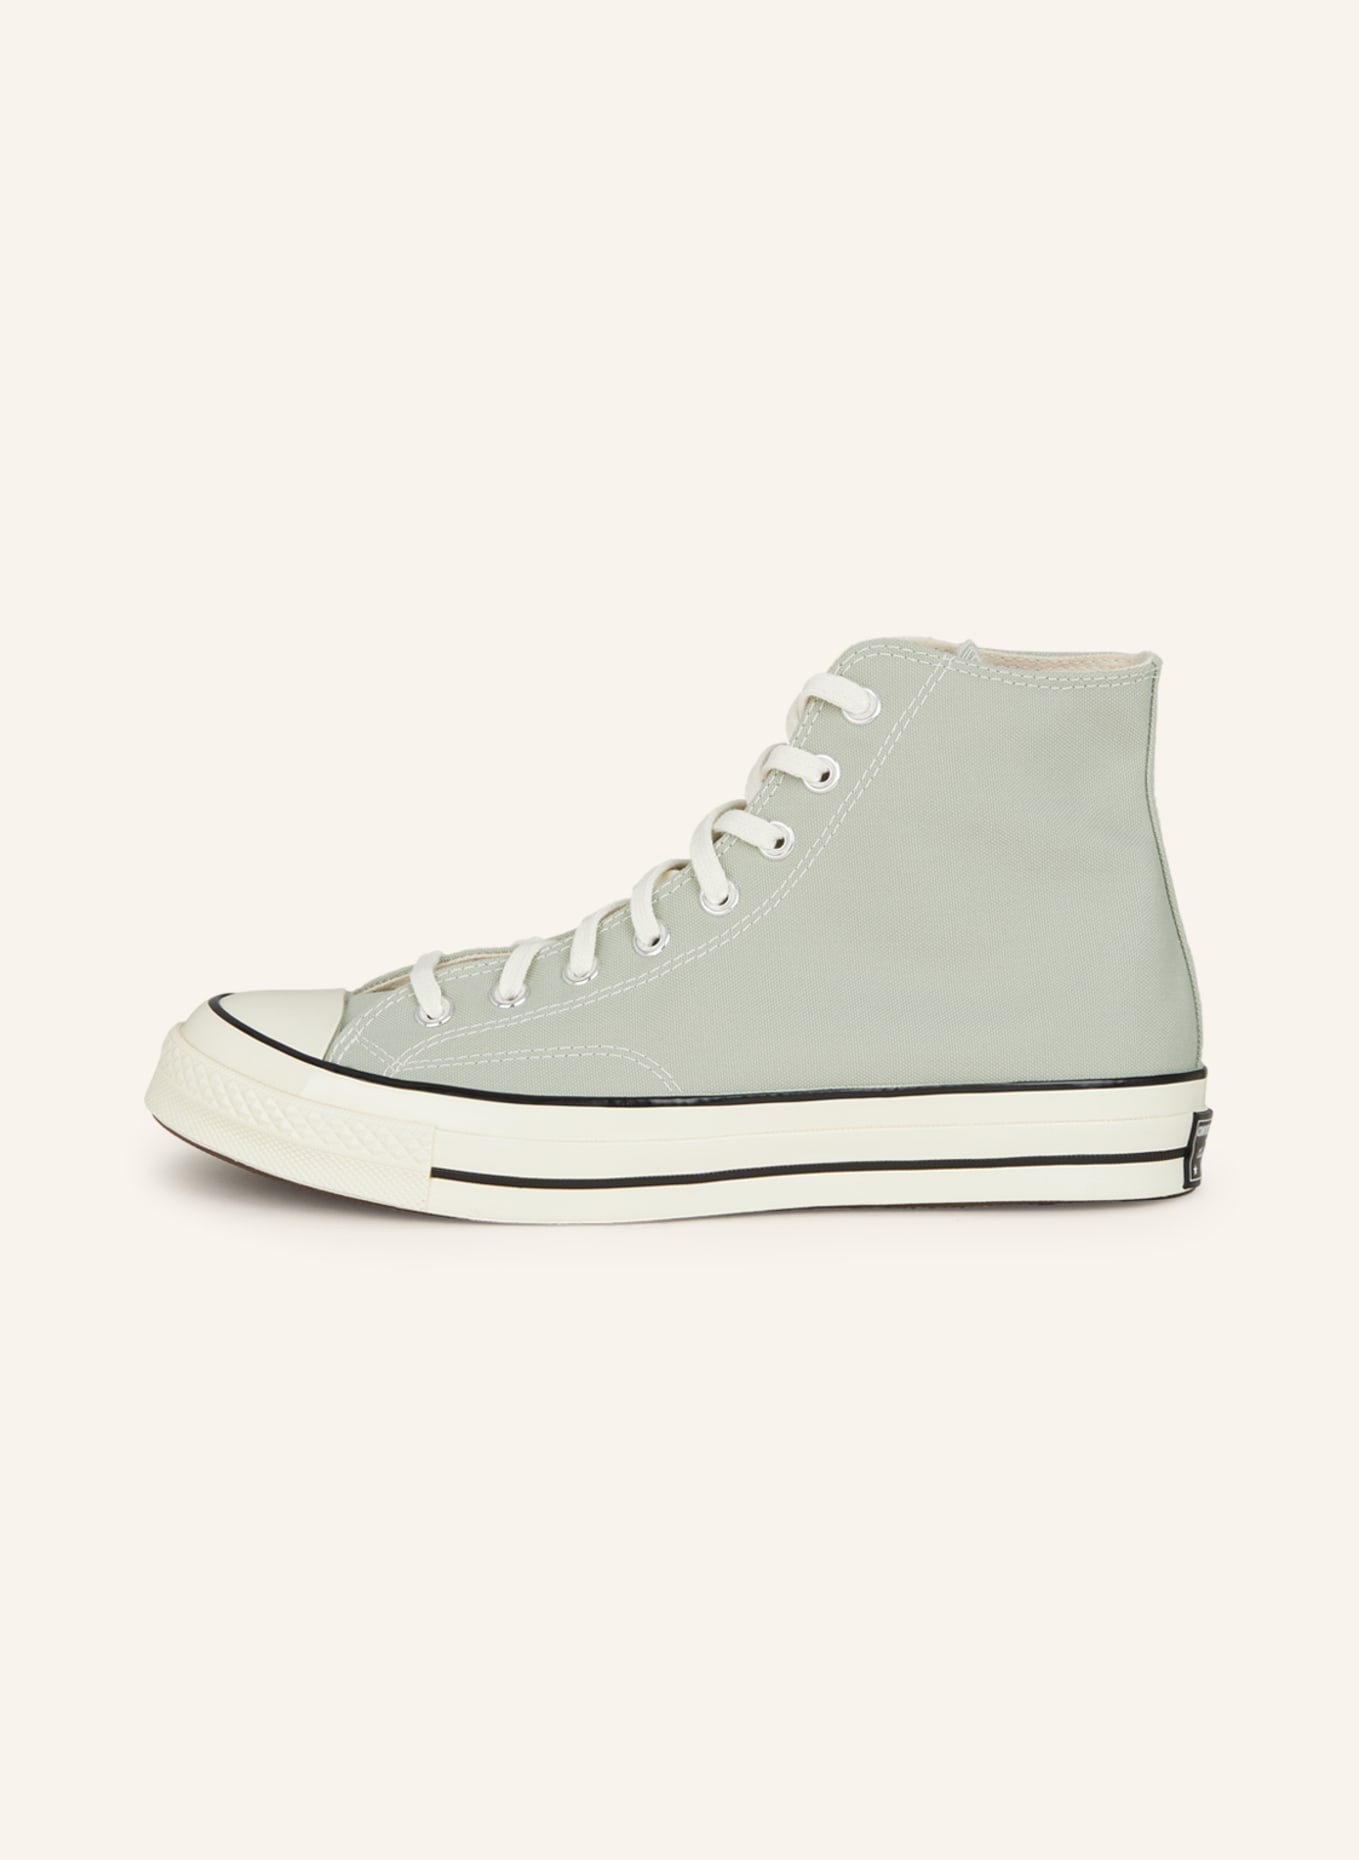 CONVERSE High-top sneakers CHUCK 70 SPRING, Color: LIGHT GRAY (Image 4)